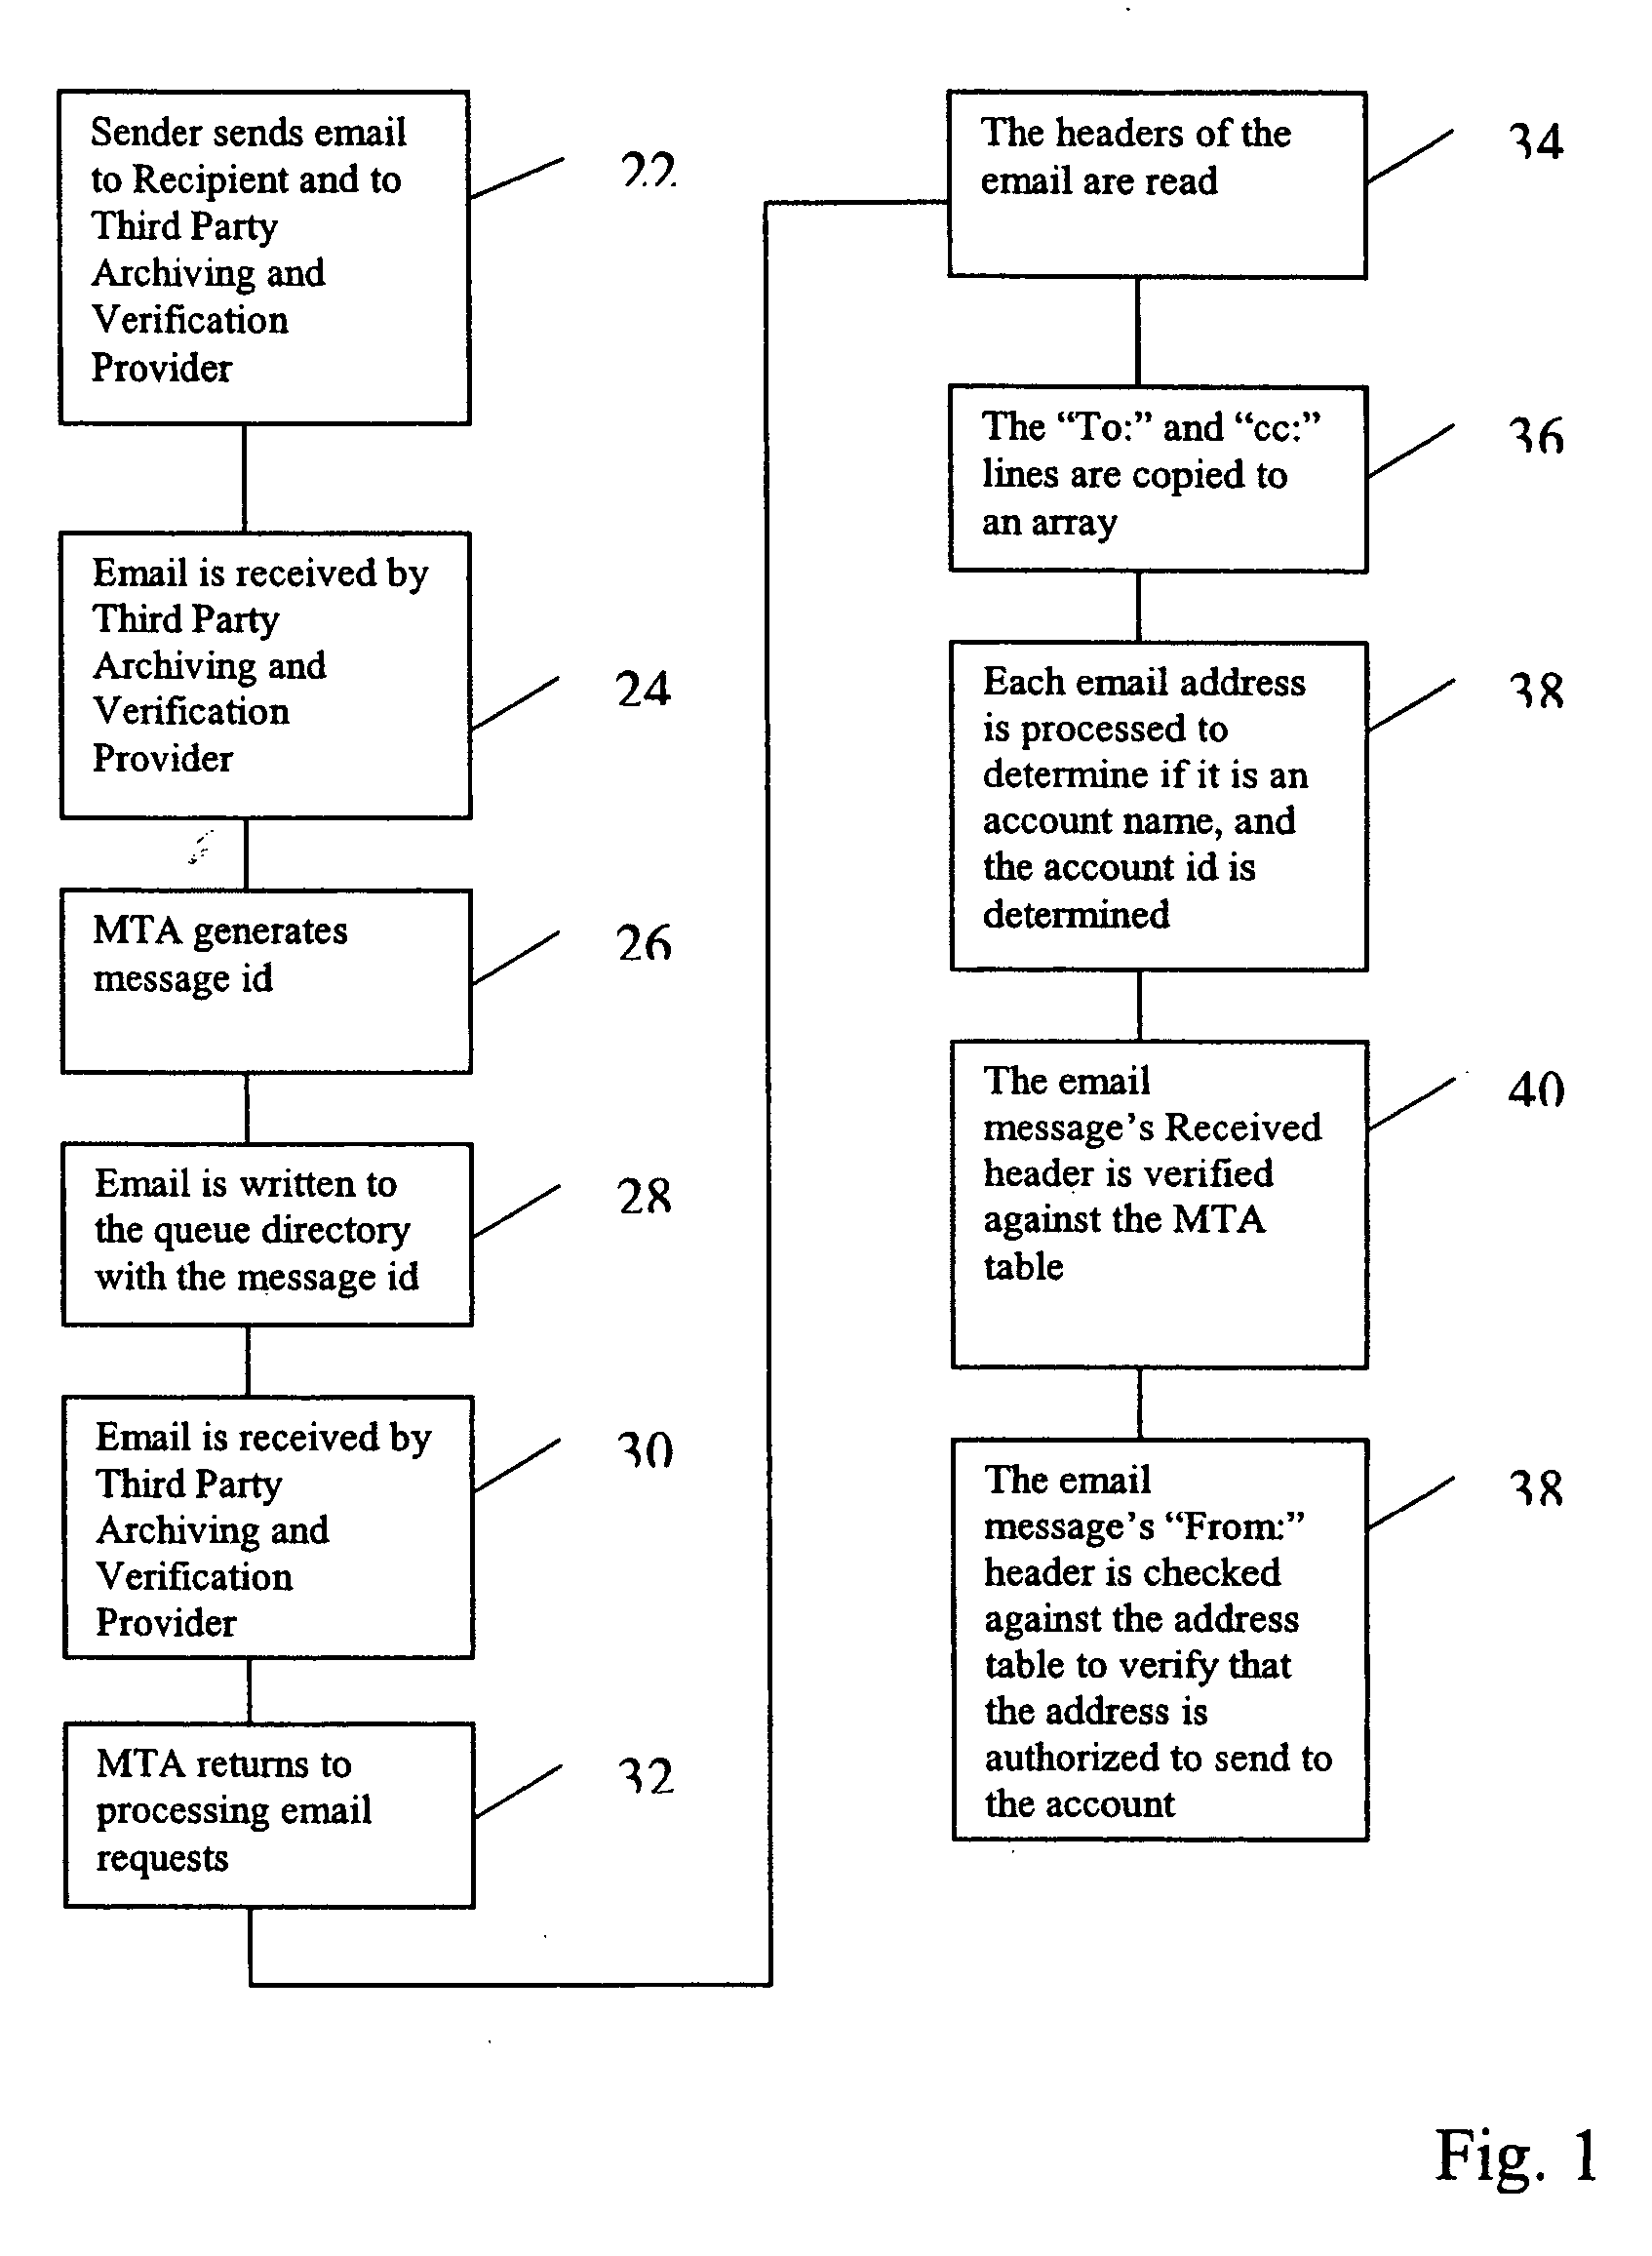 Methods and systems for achieving and verification of electronic communications